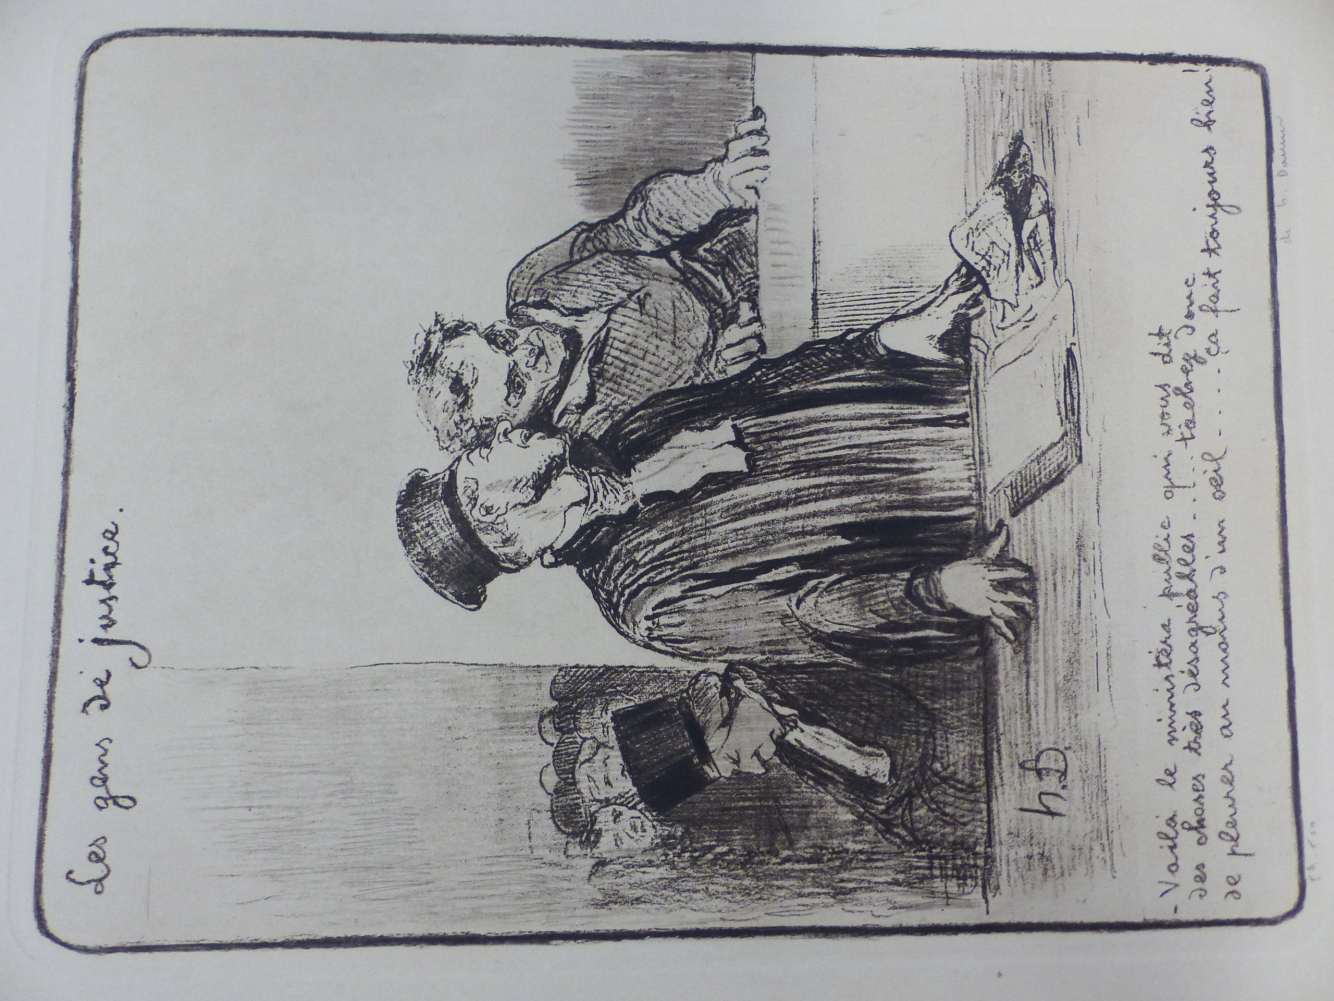 AFTER H DAUMIER, THREE VINTAGE PRINTS OF LEGAL SUBJECTS. LARGEST 39 x 30cms. ALL UNFRAMED (3) - Image 2 of 3